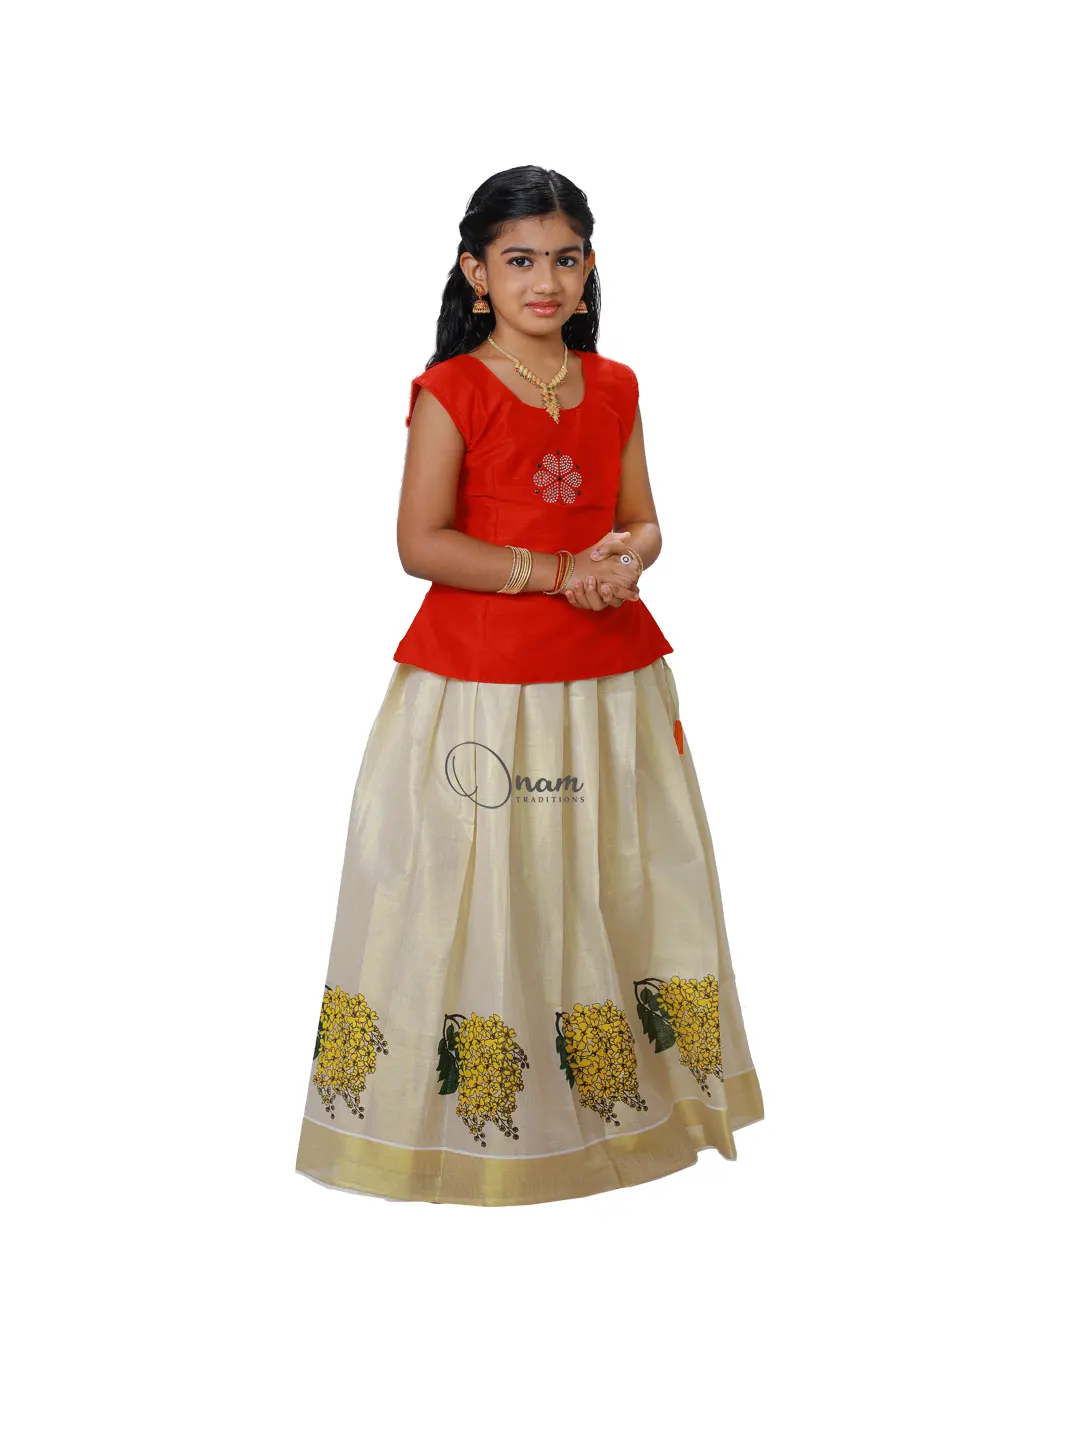 Kerala Traditional Dress Photos, Images and Pictures